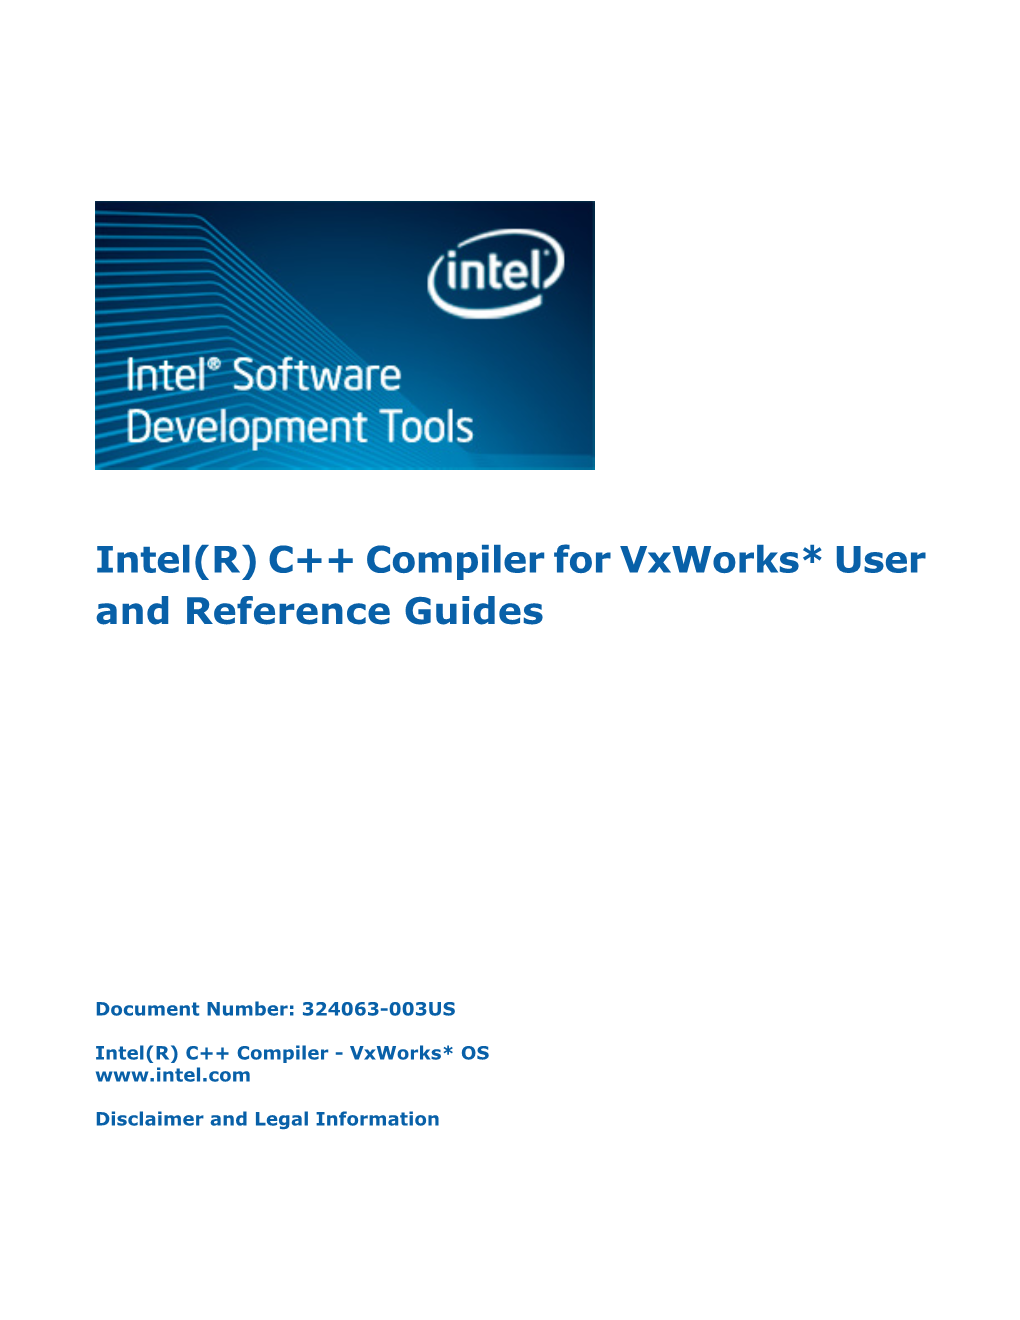 Intel(R) C++ Compiler for Vxworks* User and Reference Guides